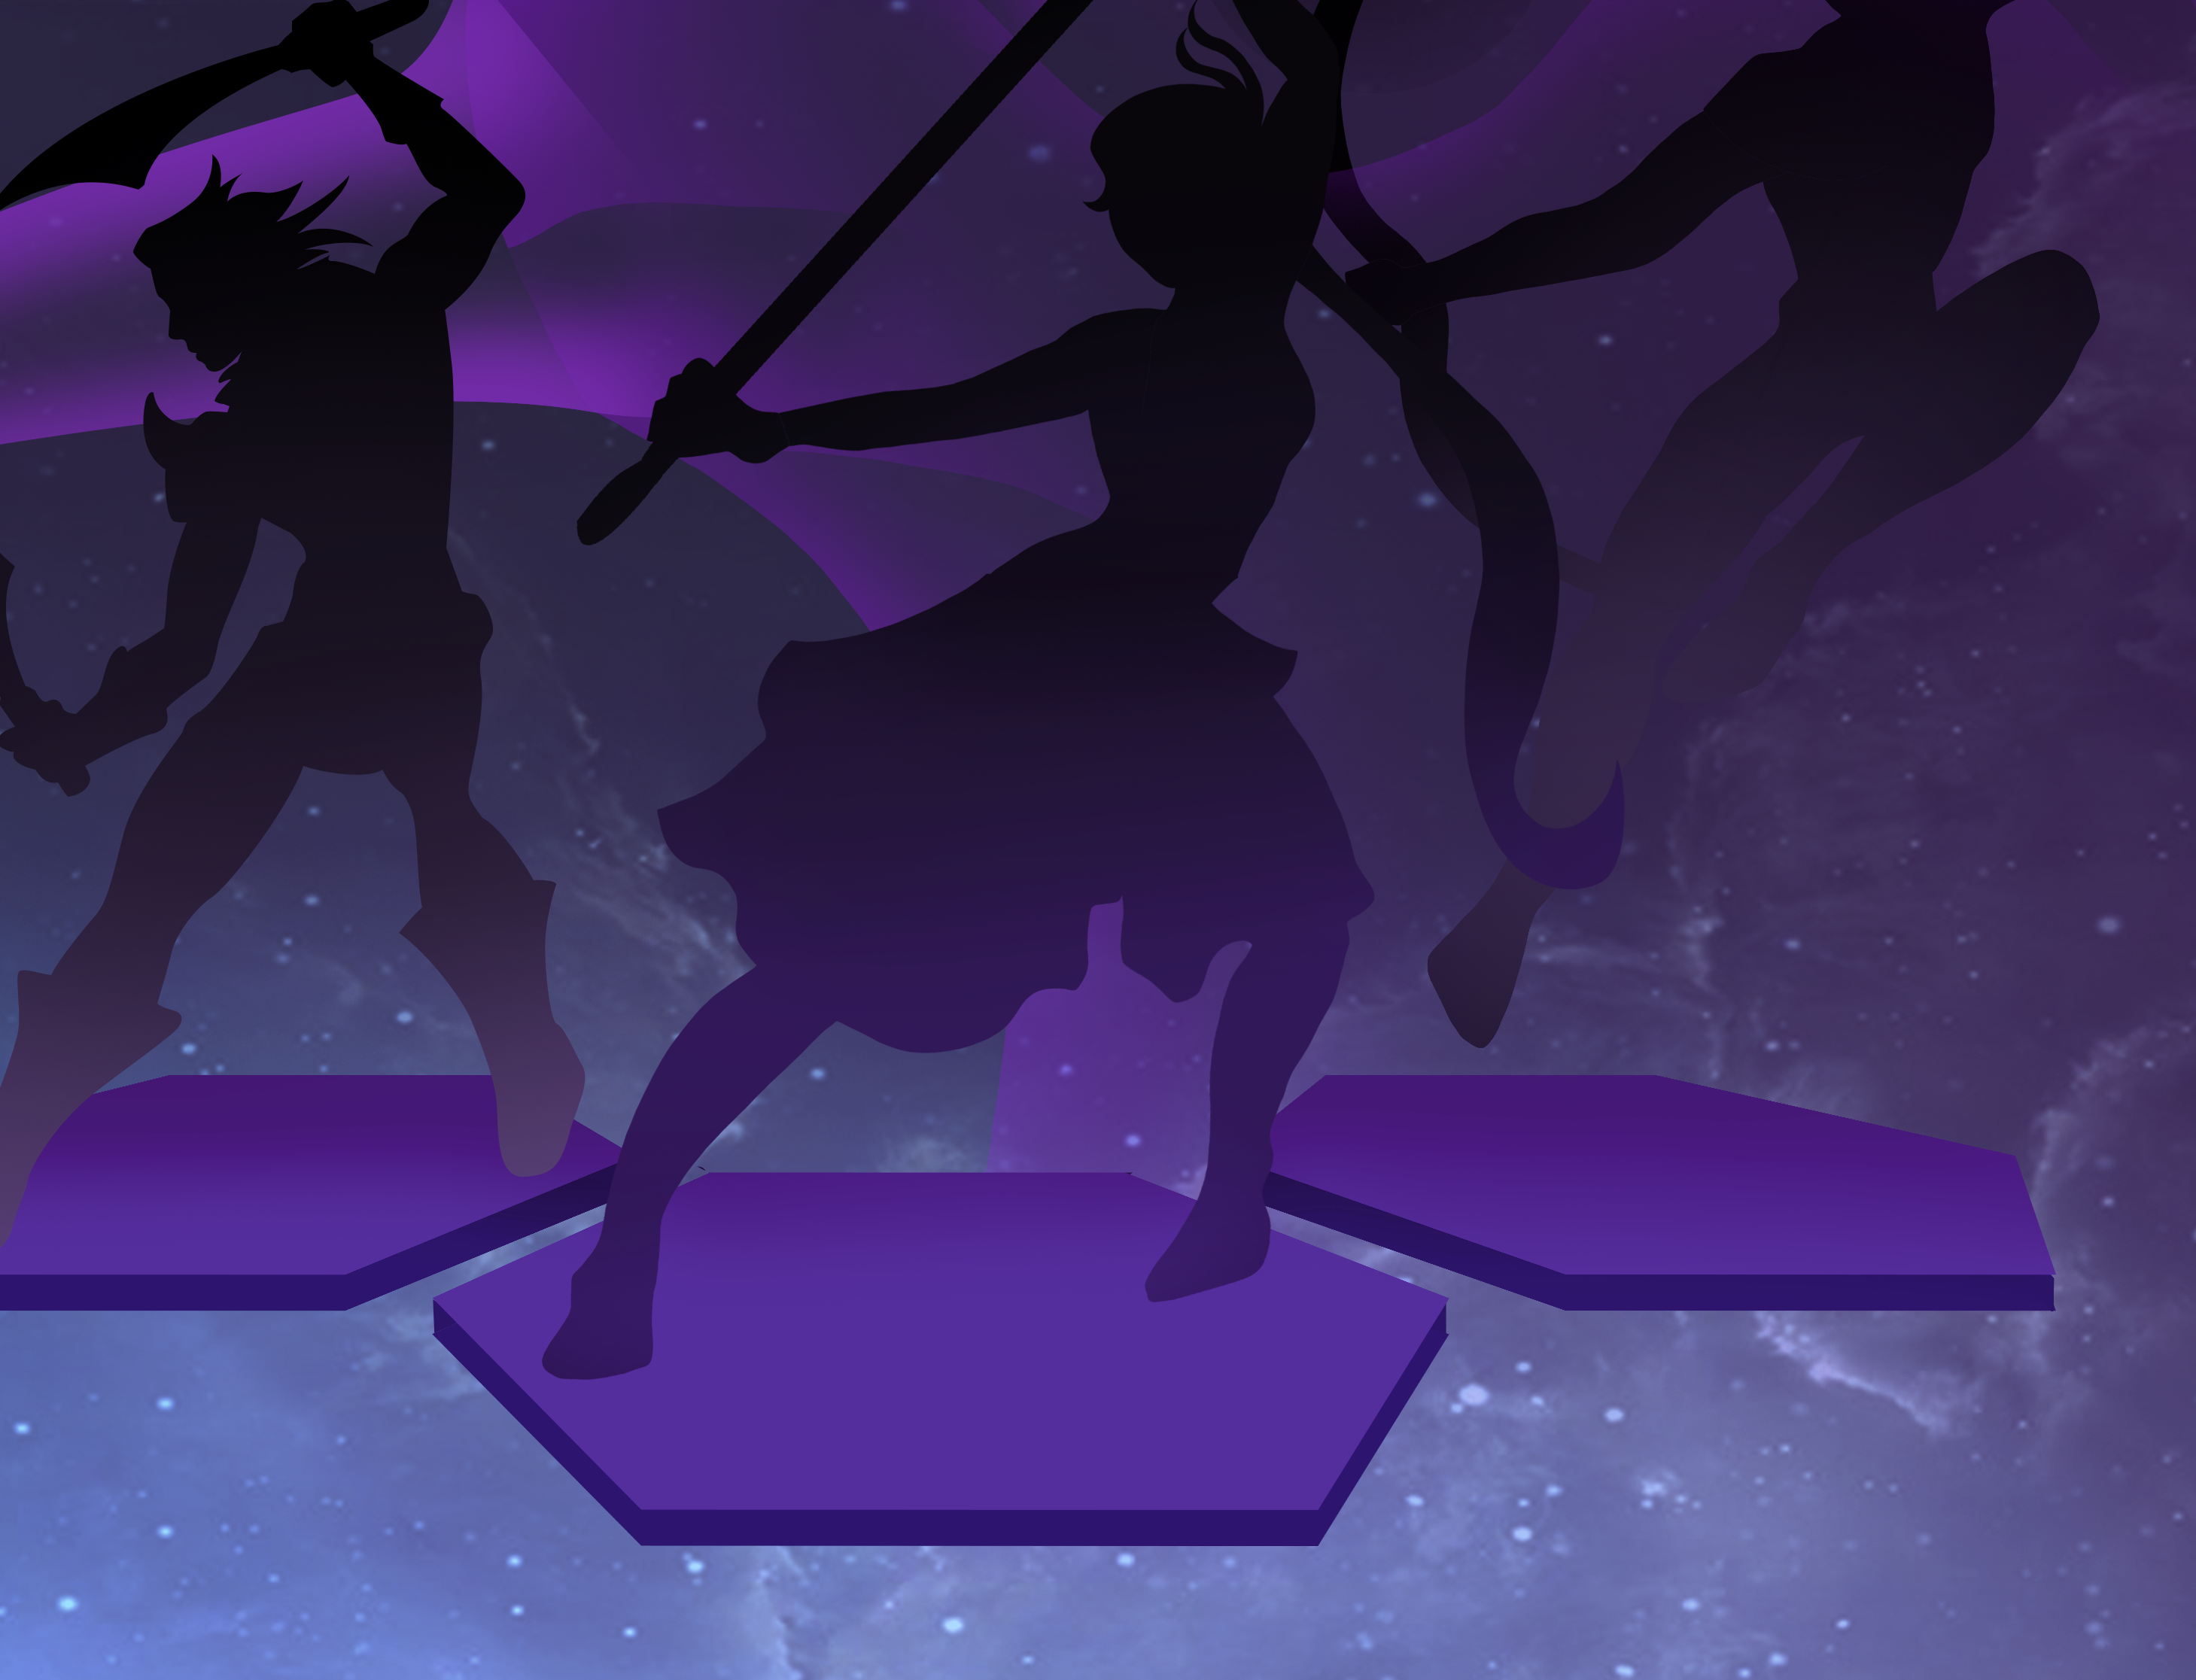 Three character silhouettes on hexagons against a starry background.